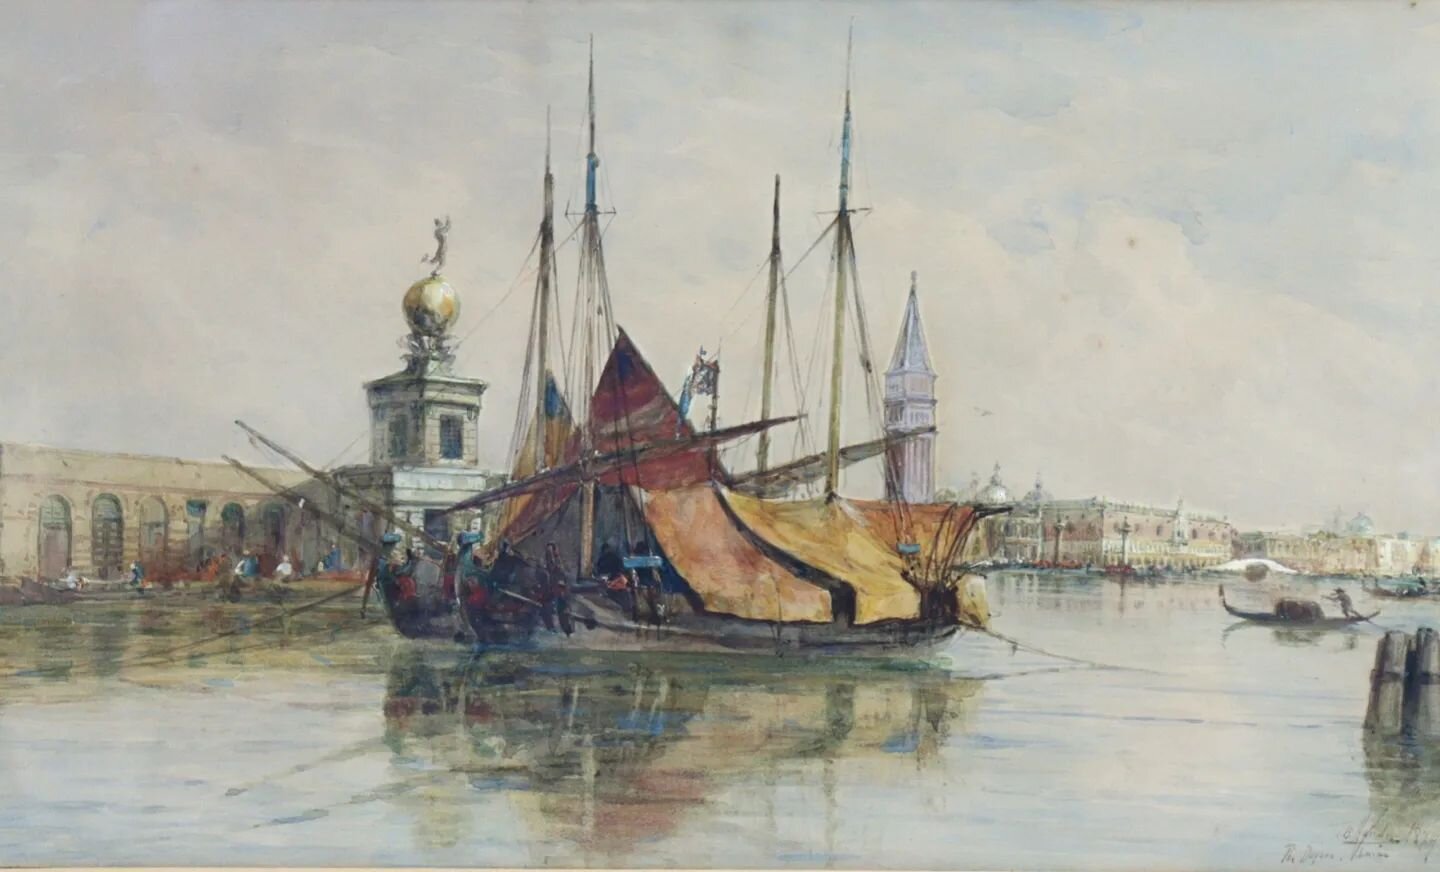 .
Thomas Bush Hardy, R.B.A. (1842-1897)

&quot;The Dogana, Venice&quot;, 1879.
Watercolour

Included in our 26th March Fine Art &amp; Antiques Sale

.

.

.

.

.

.

.

.

.

.

.

#fineart #painting #paintings #watercolour #watercolourpainting #wat